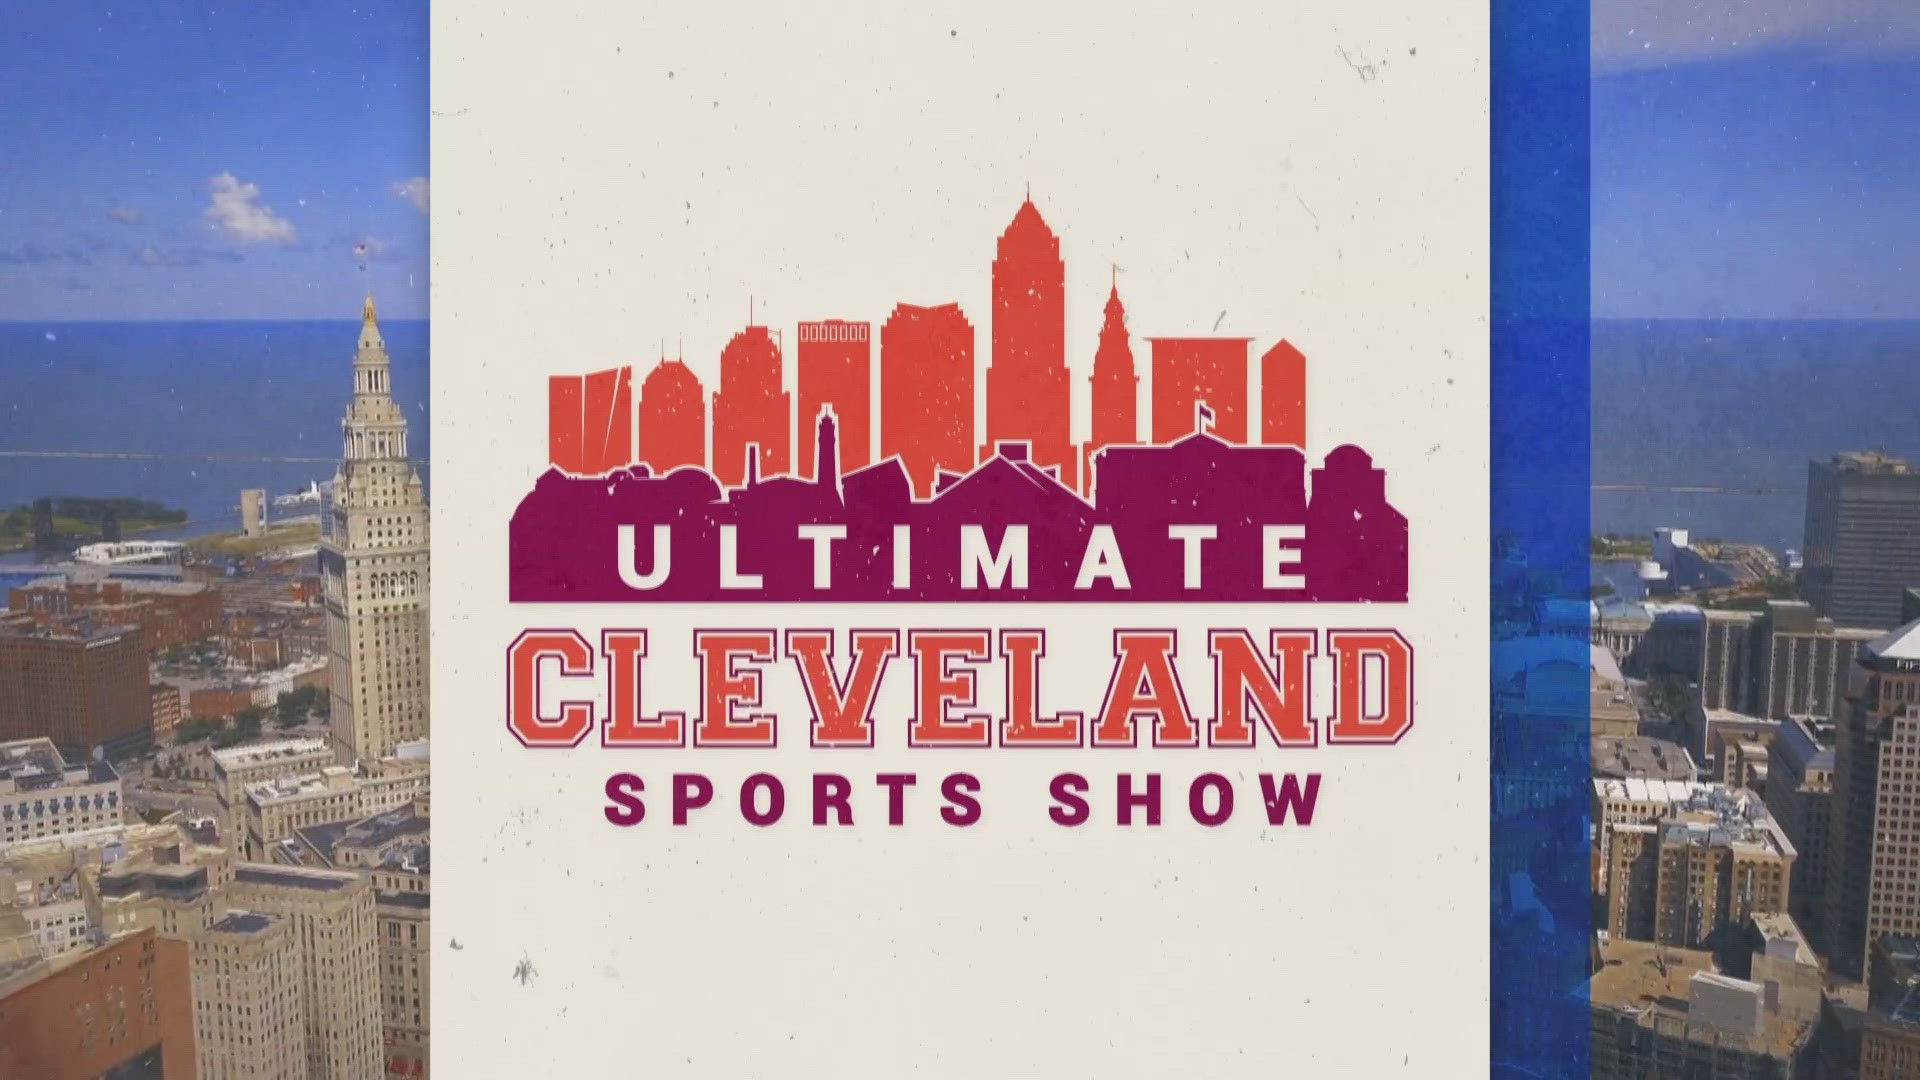 The Ultimate Cleveland Sports Show!